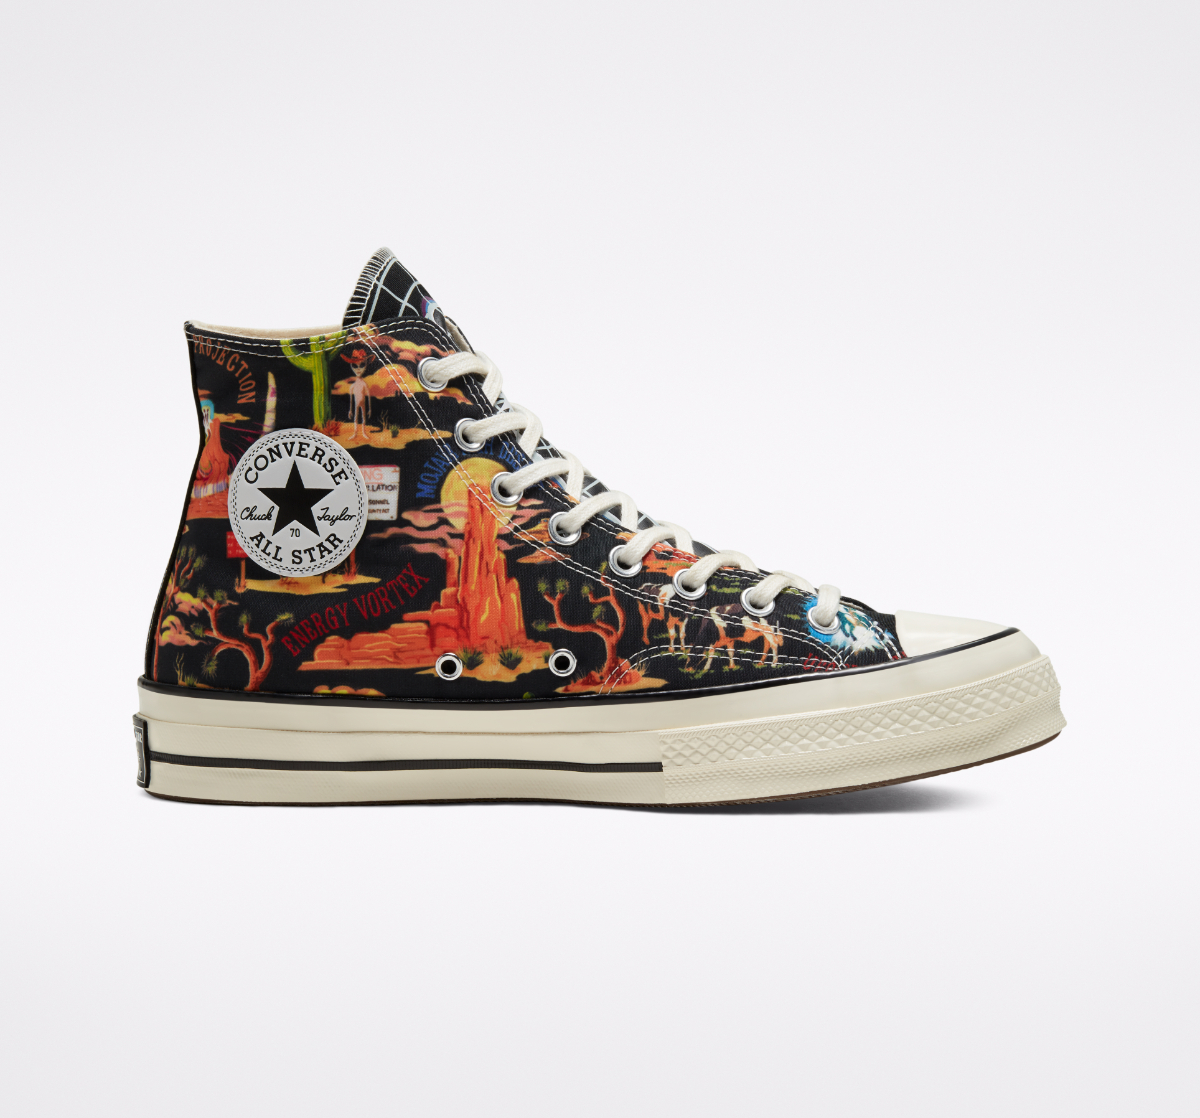 Converse Present Extra-Terrestrial Scenes on Latest Sneakers – PAUSE ...